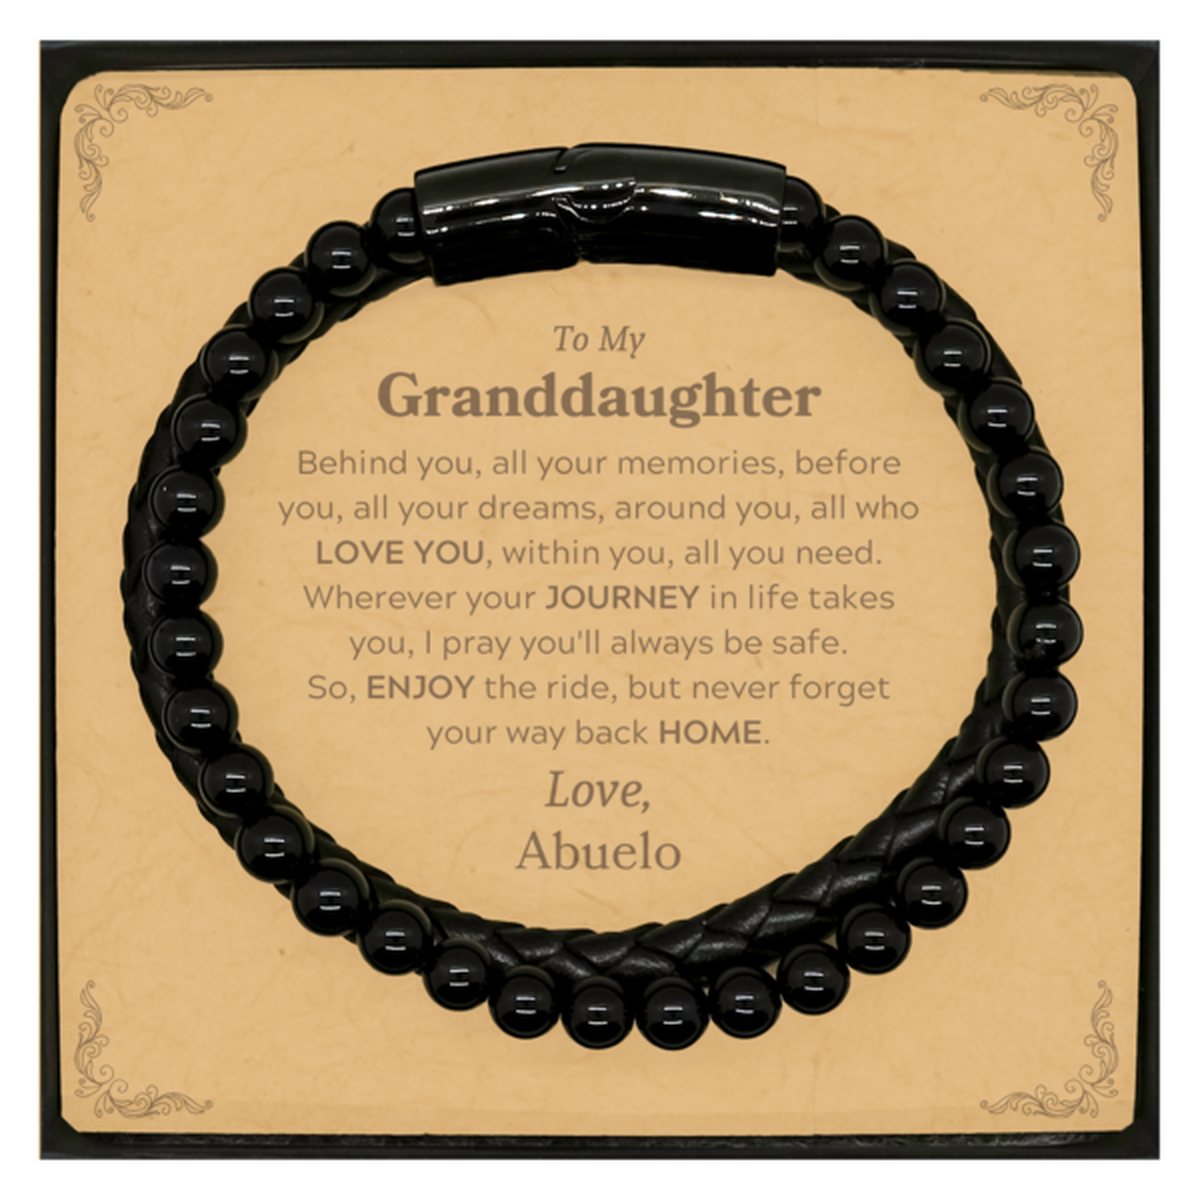 To My Granddaughter Graduation Gifts from Abuelo, Granddaughter Stone Leather Bracelets Christmas Birthday Gifts for Granddaughter Behind you, all your memories, before you, all your dreams. Love, Abuelo